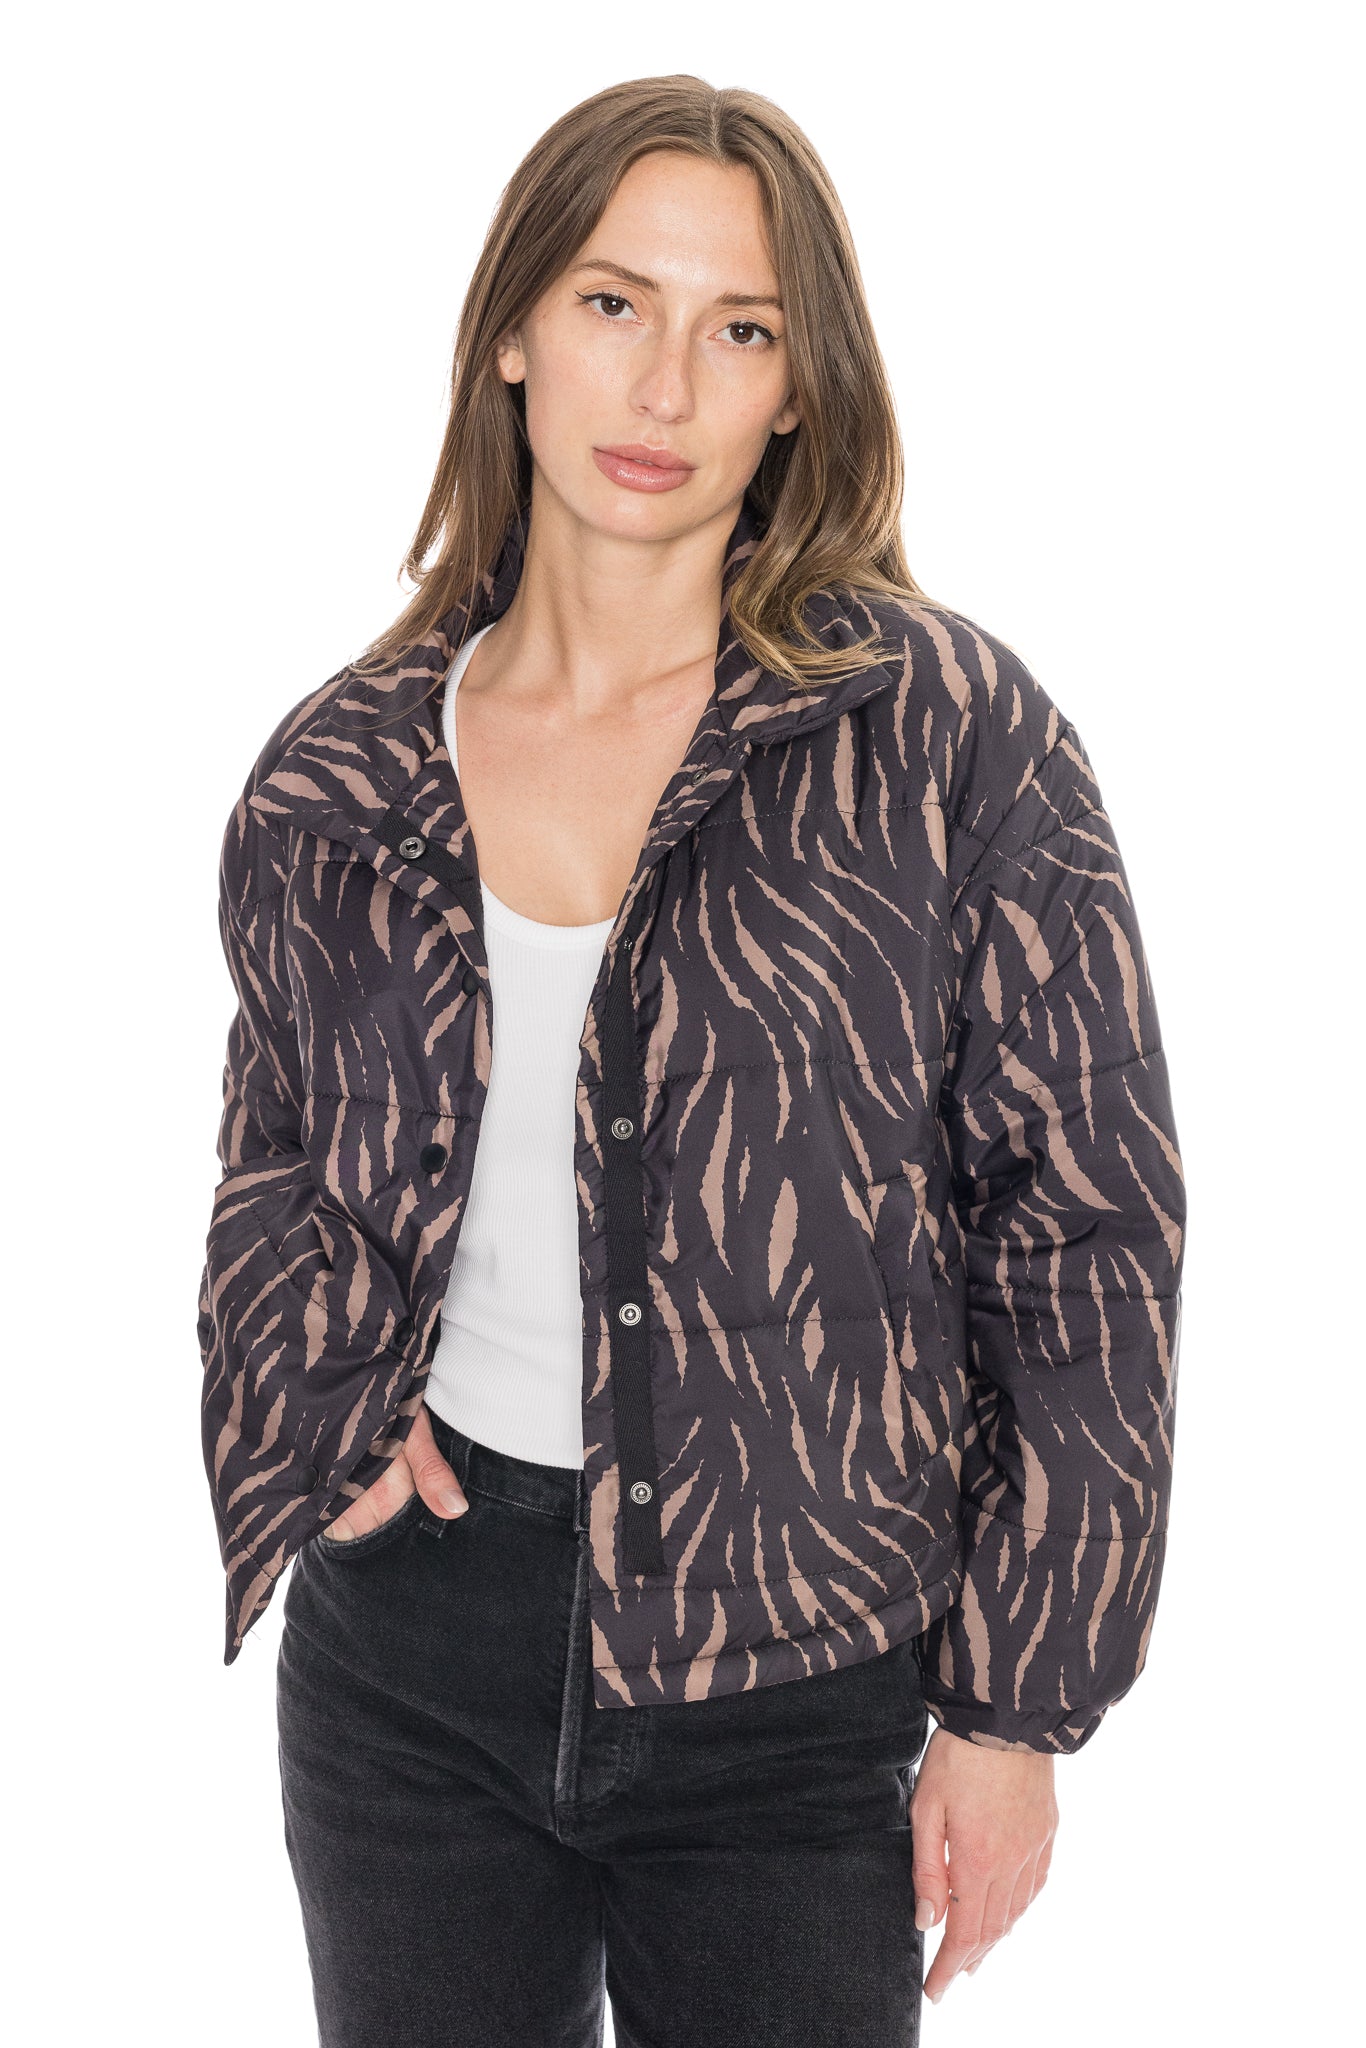 Shayne Jacket by Saltwater Luxe